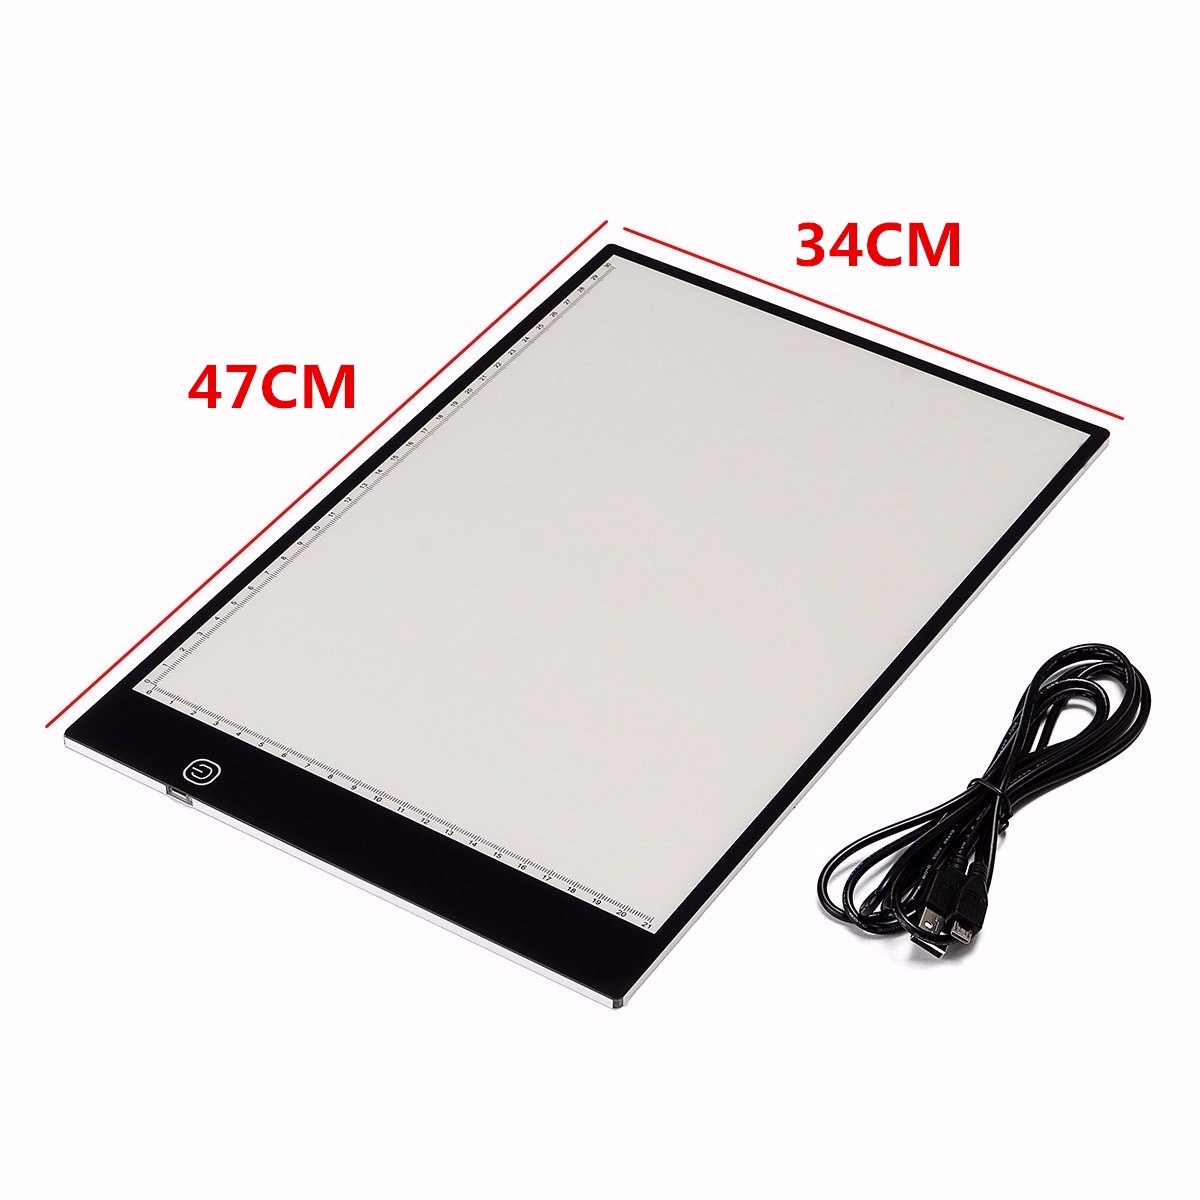 MWay-Ultra-Thin-A3-LED-Copy-With-USB-Cable-Adjustable-Brightness-Drawing-Pad-Tracing-Copy-Board-1345159-2